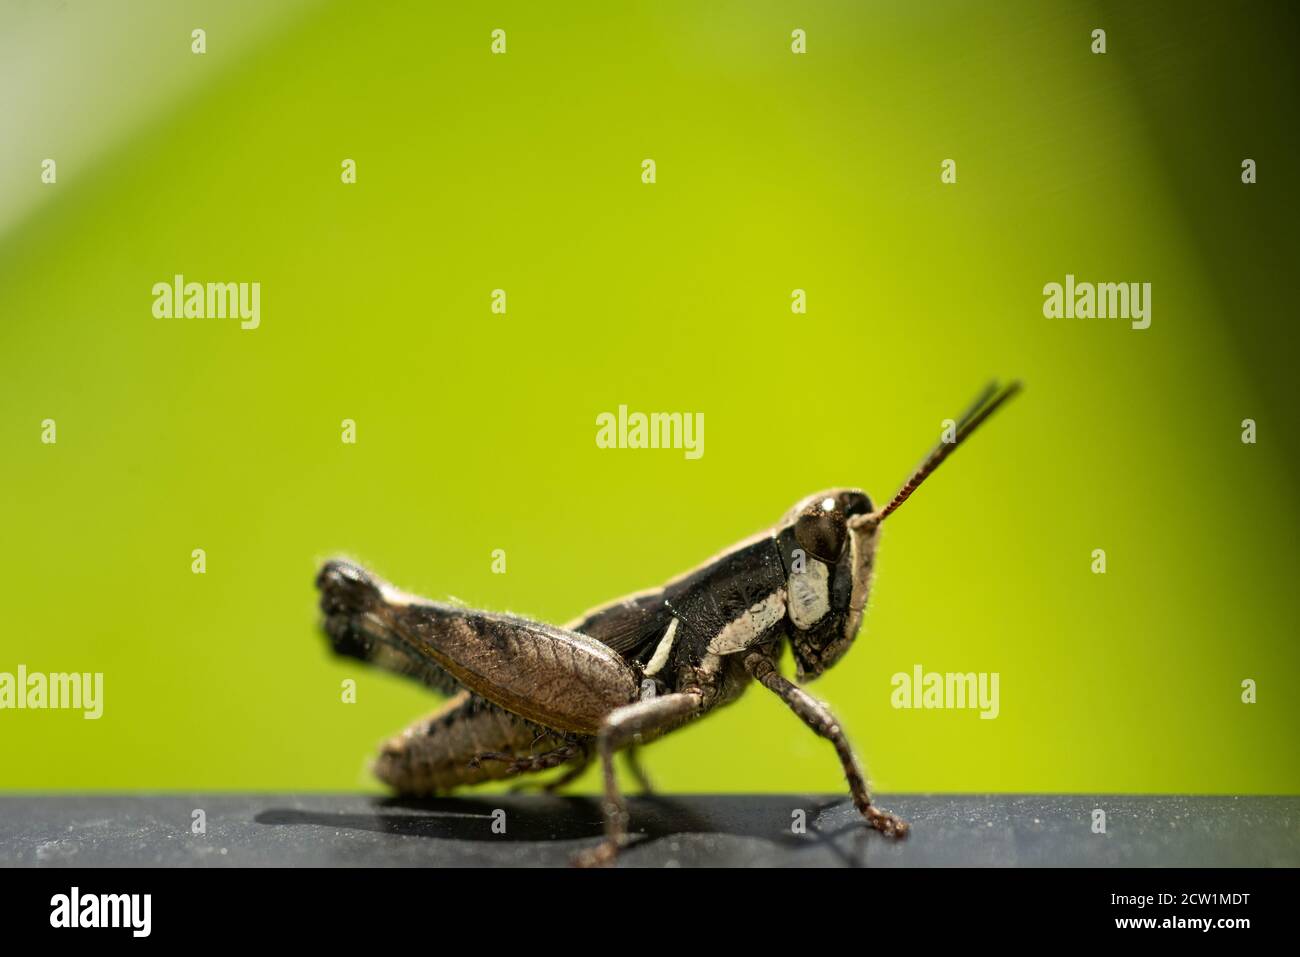 Macro close up of a colorful Mexican grasshopper details, selective focus Stock Photo